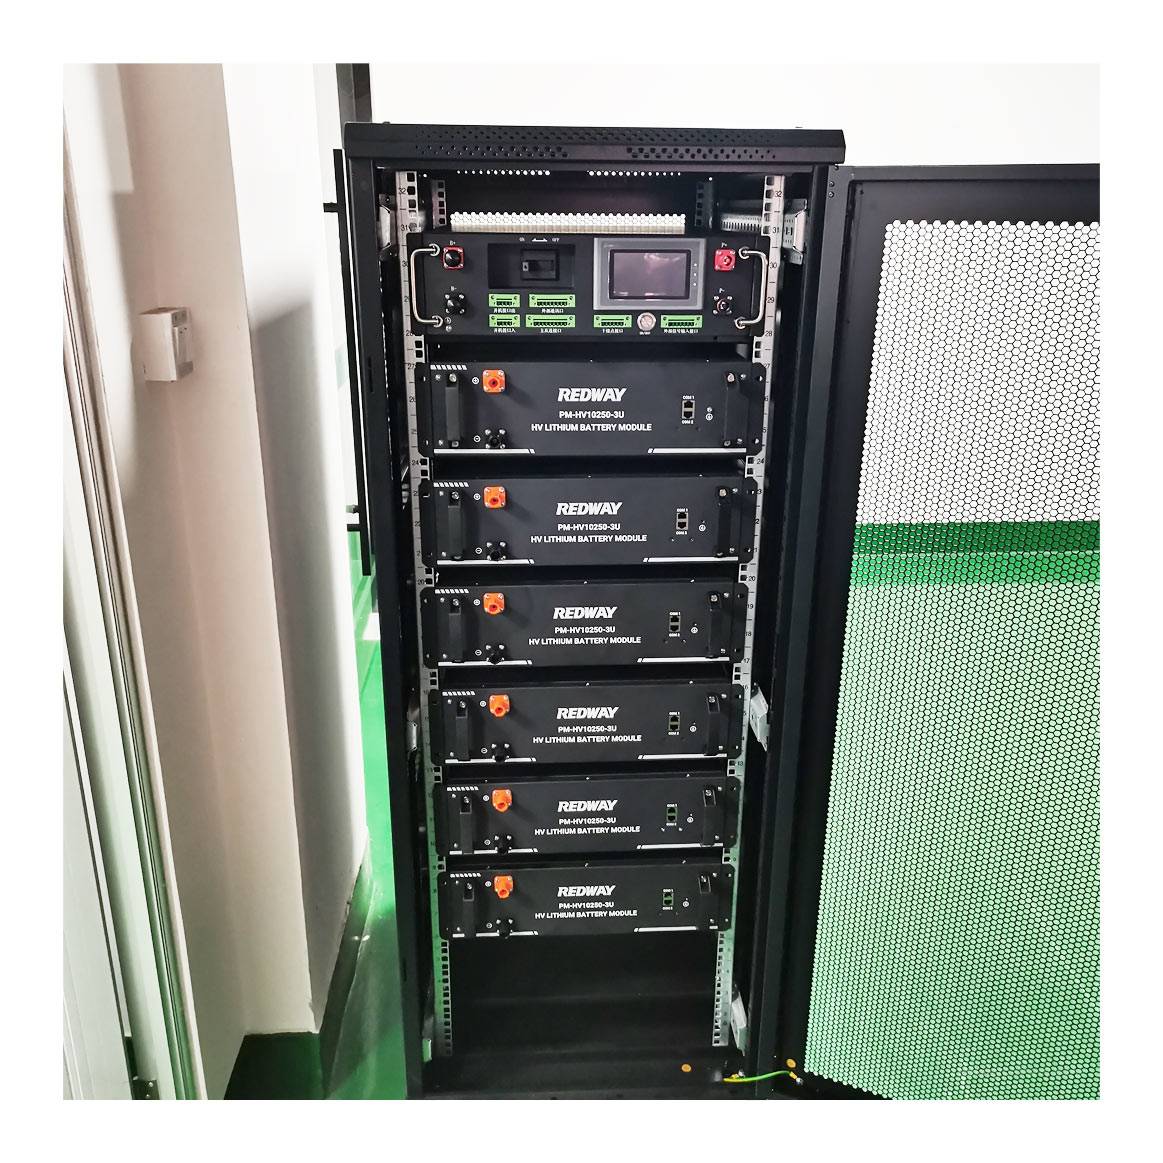  100V 50Ah High Voltage Lithium Battery Module and Rack System (with BCU) / PM-HV10250-3U